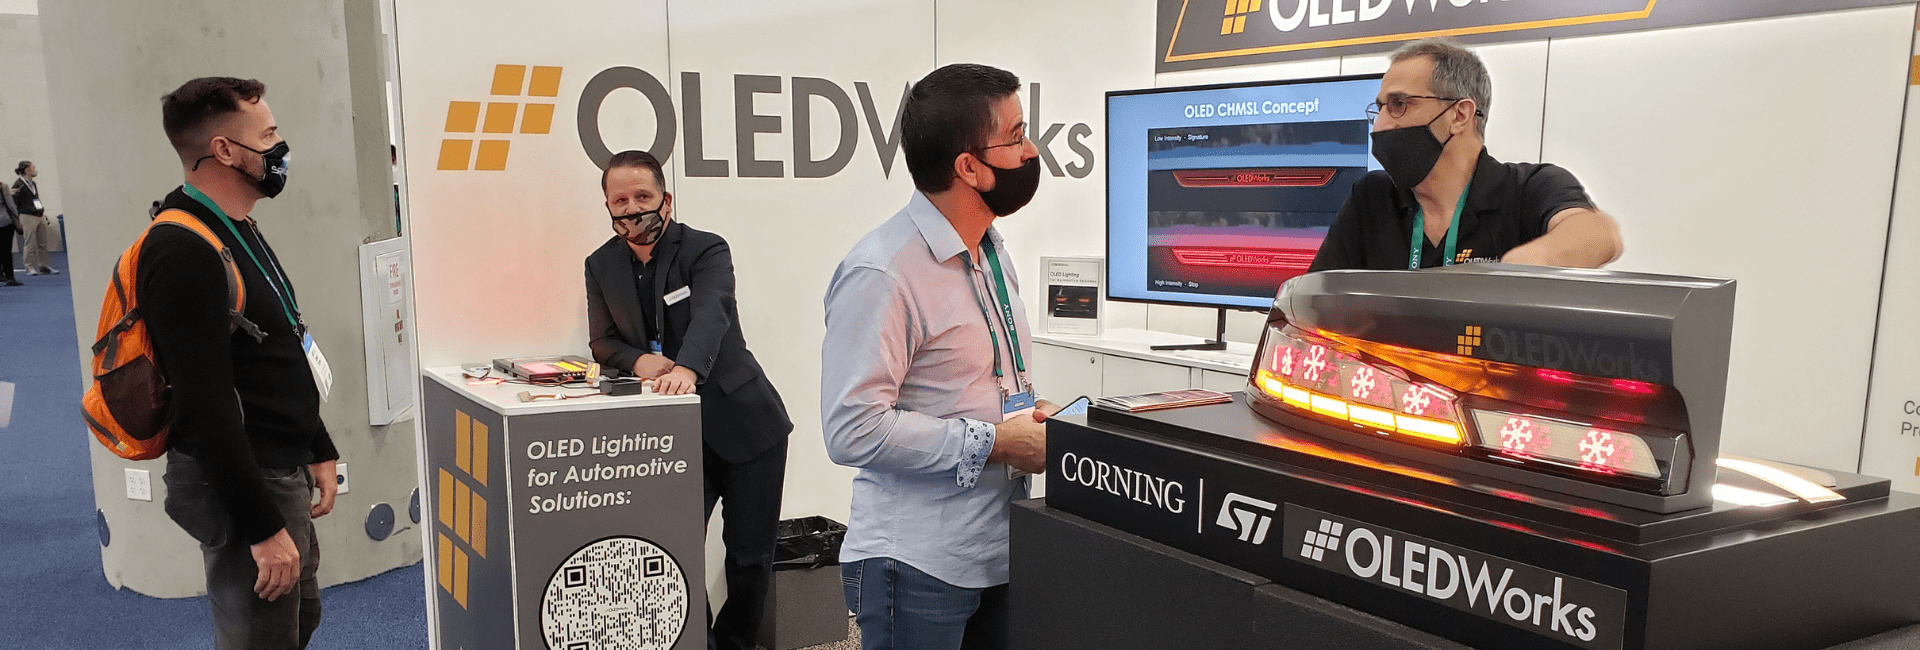 OLEDWorks Demonstrates Newest OLED Technology for Rear Automotive Lighting Applications at CES